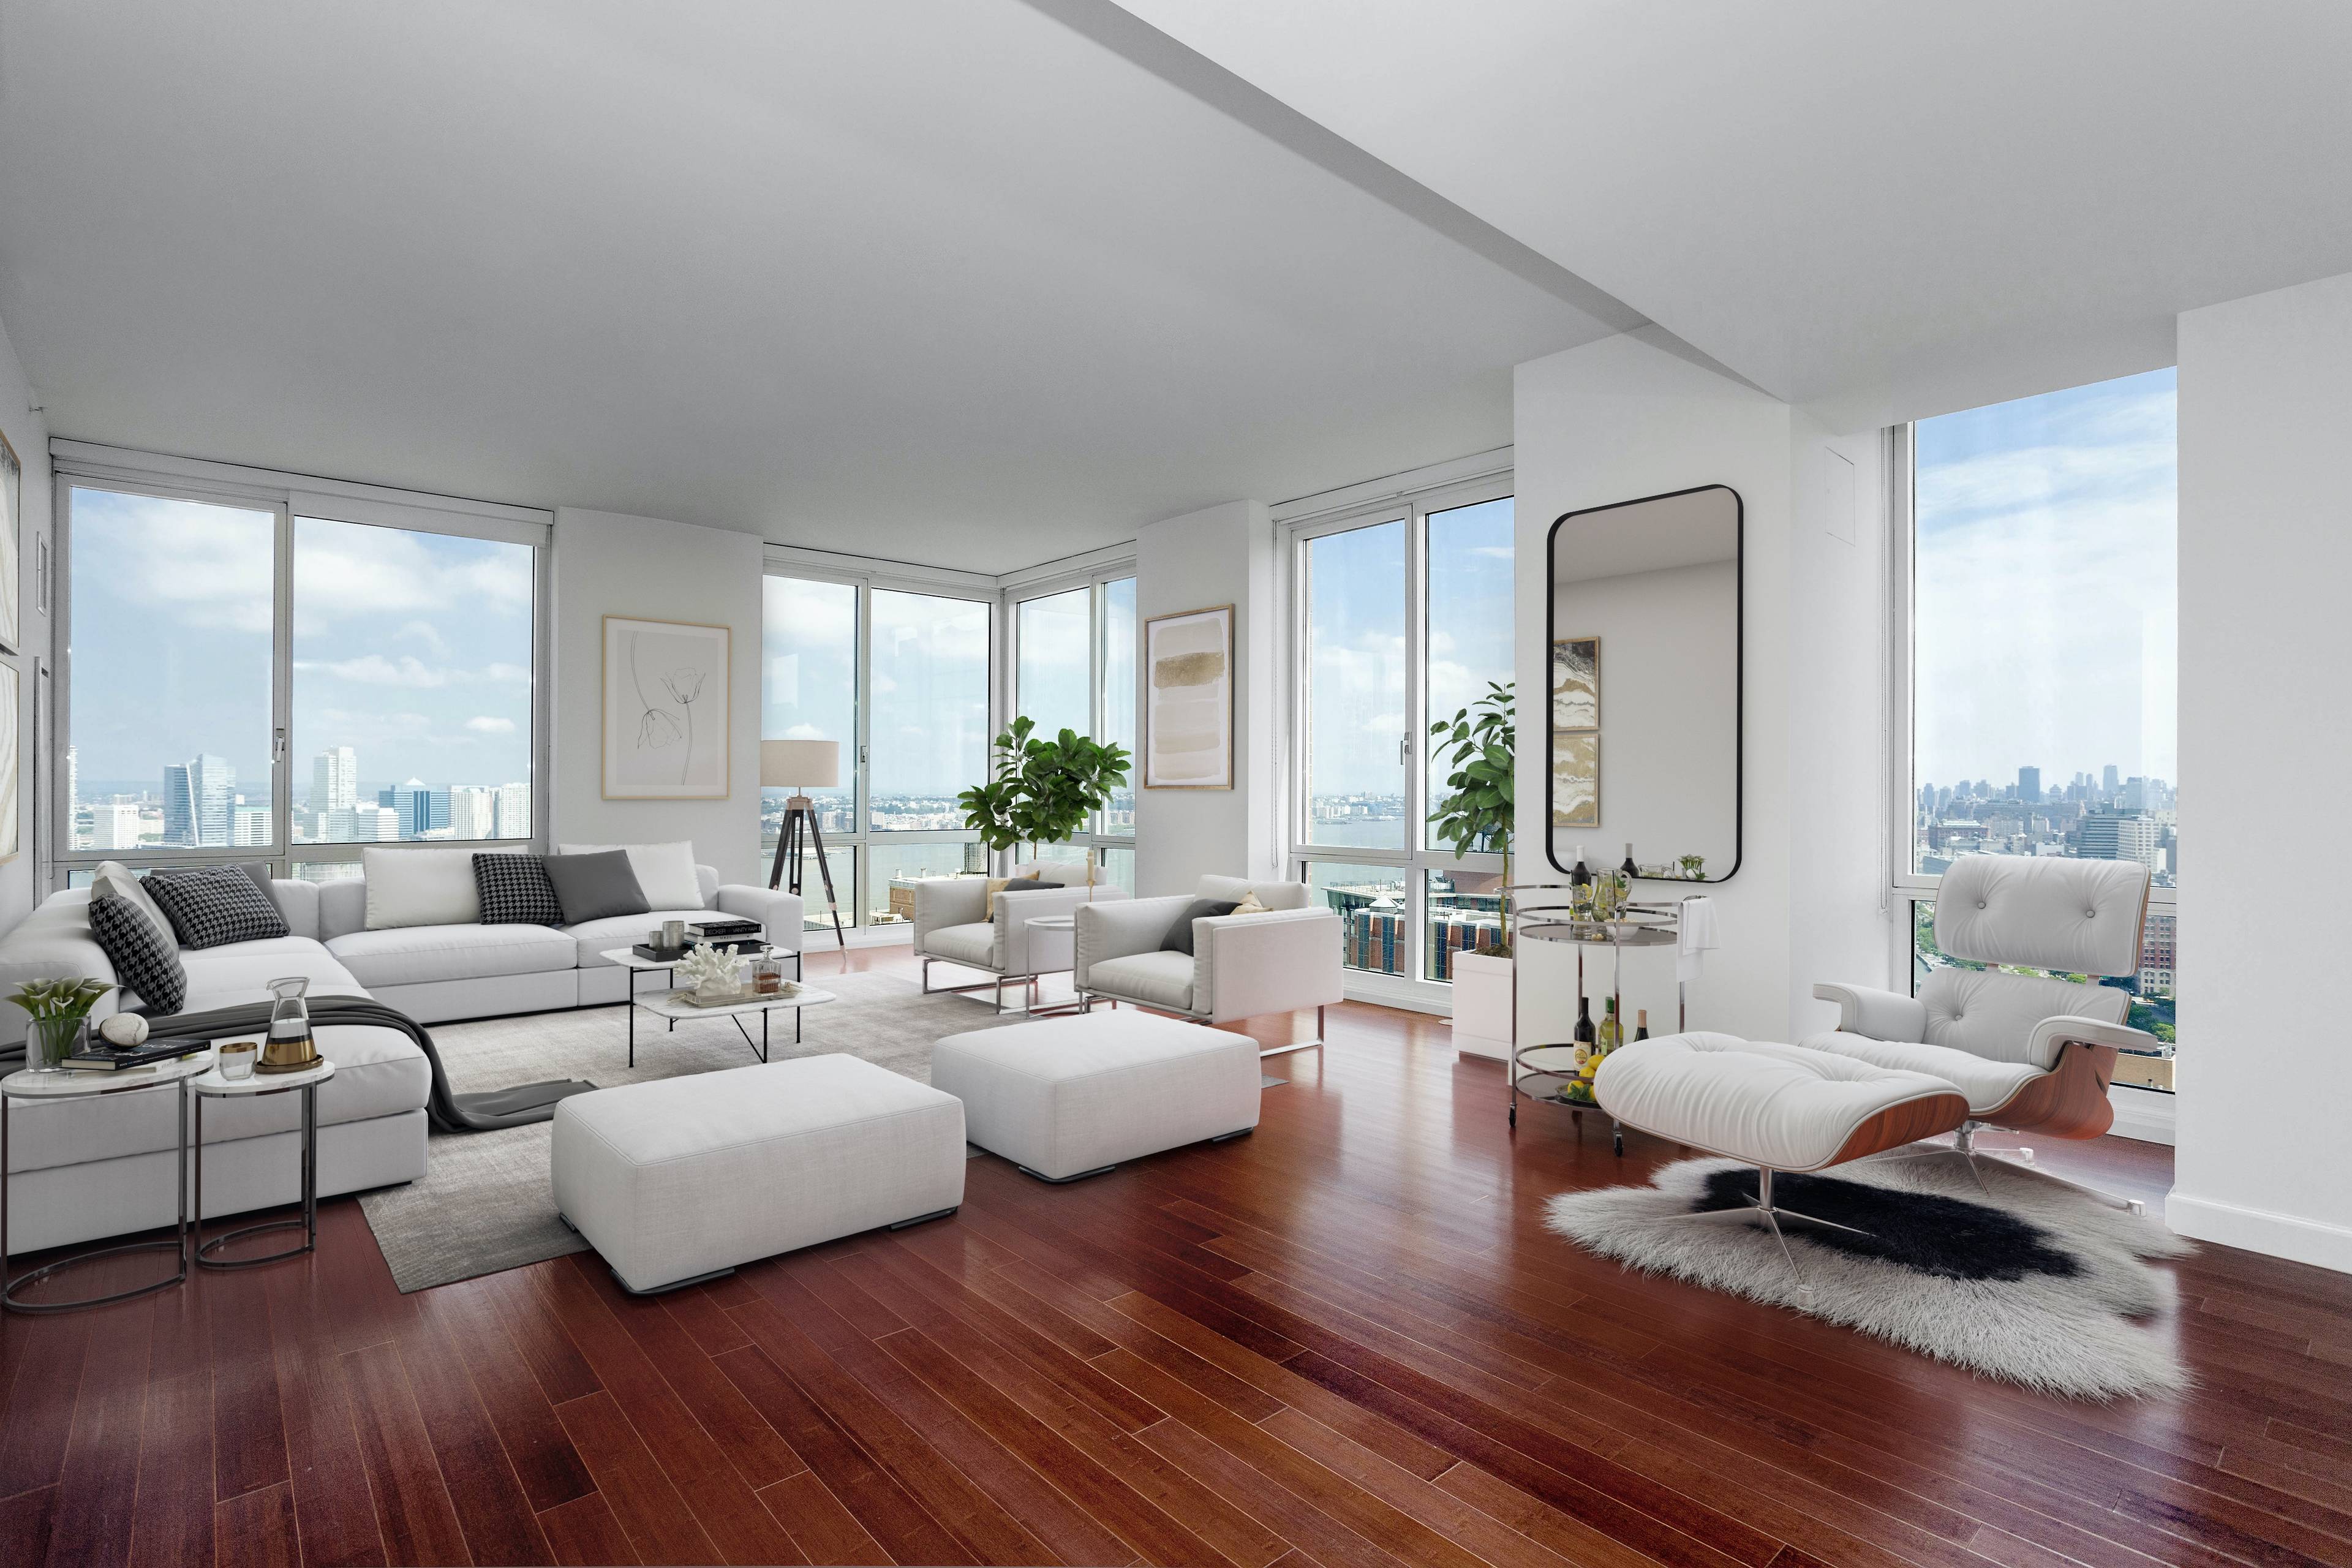 No Fee!3 Bed/3 Bath/Luxury Penthouse in Battery Park City!